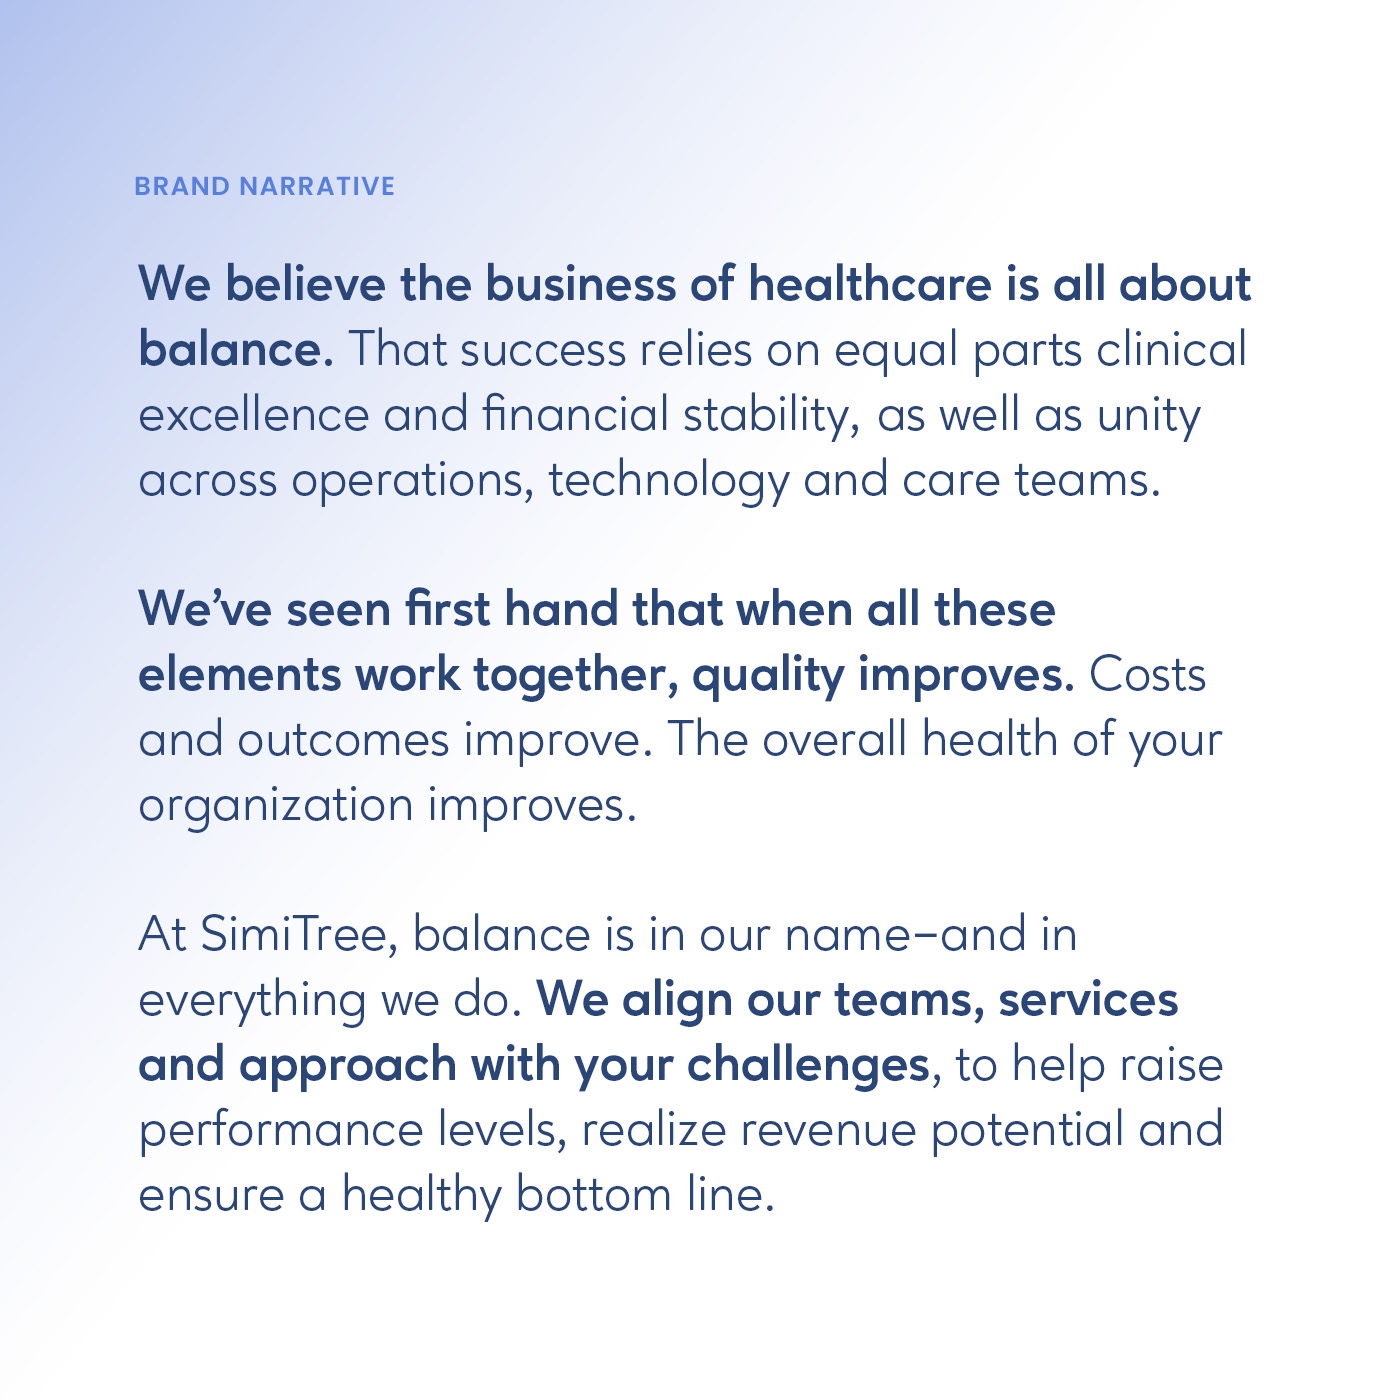 SimiTree's brand narrative, which begins "We believe the business of healthcare is all about balance. That success relies on equal parts excellence and financial stability, as well as unity across operations, technology and care teams."